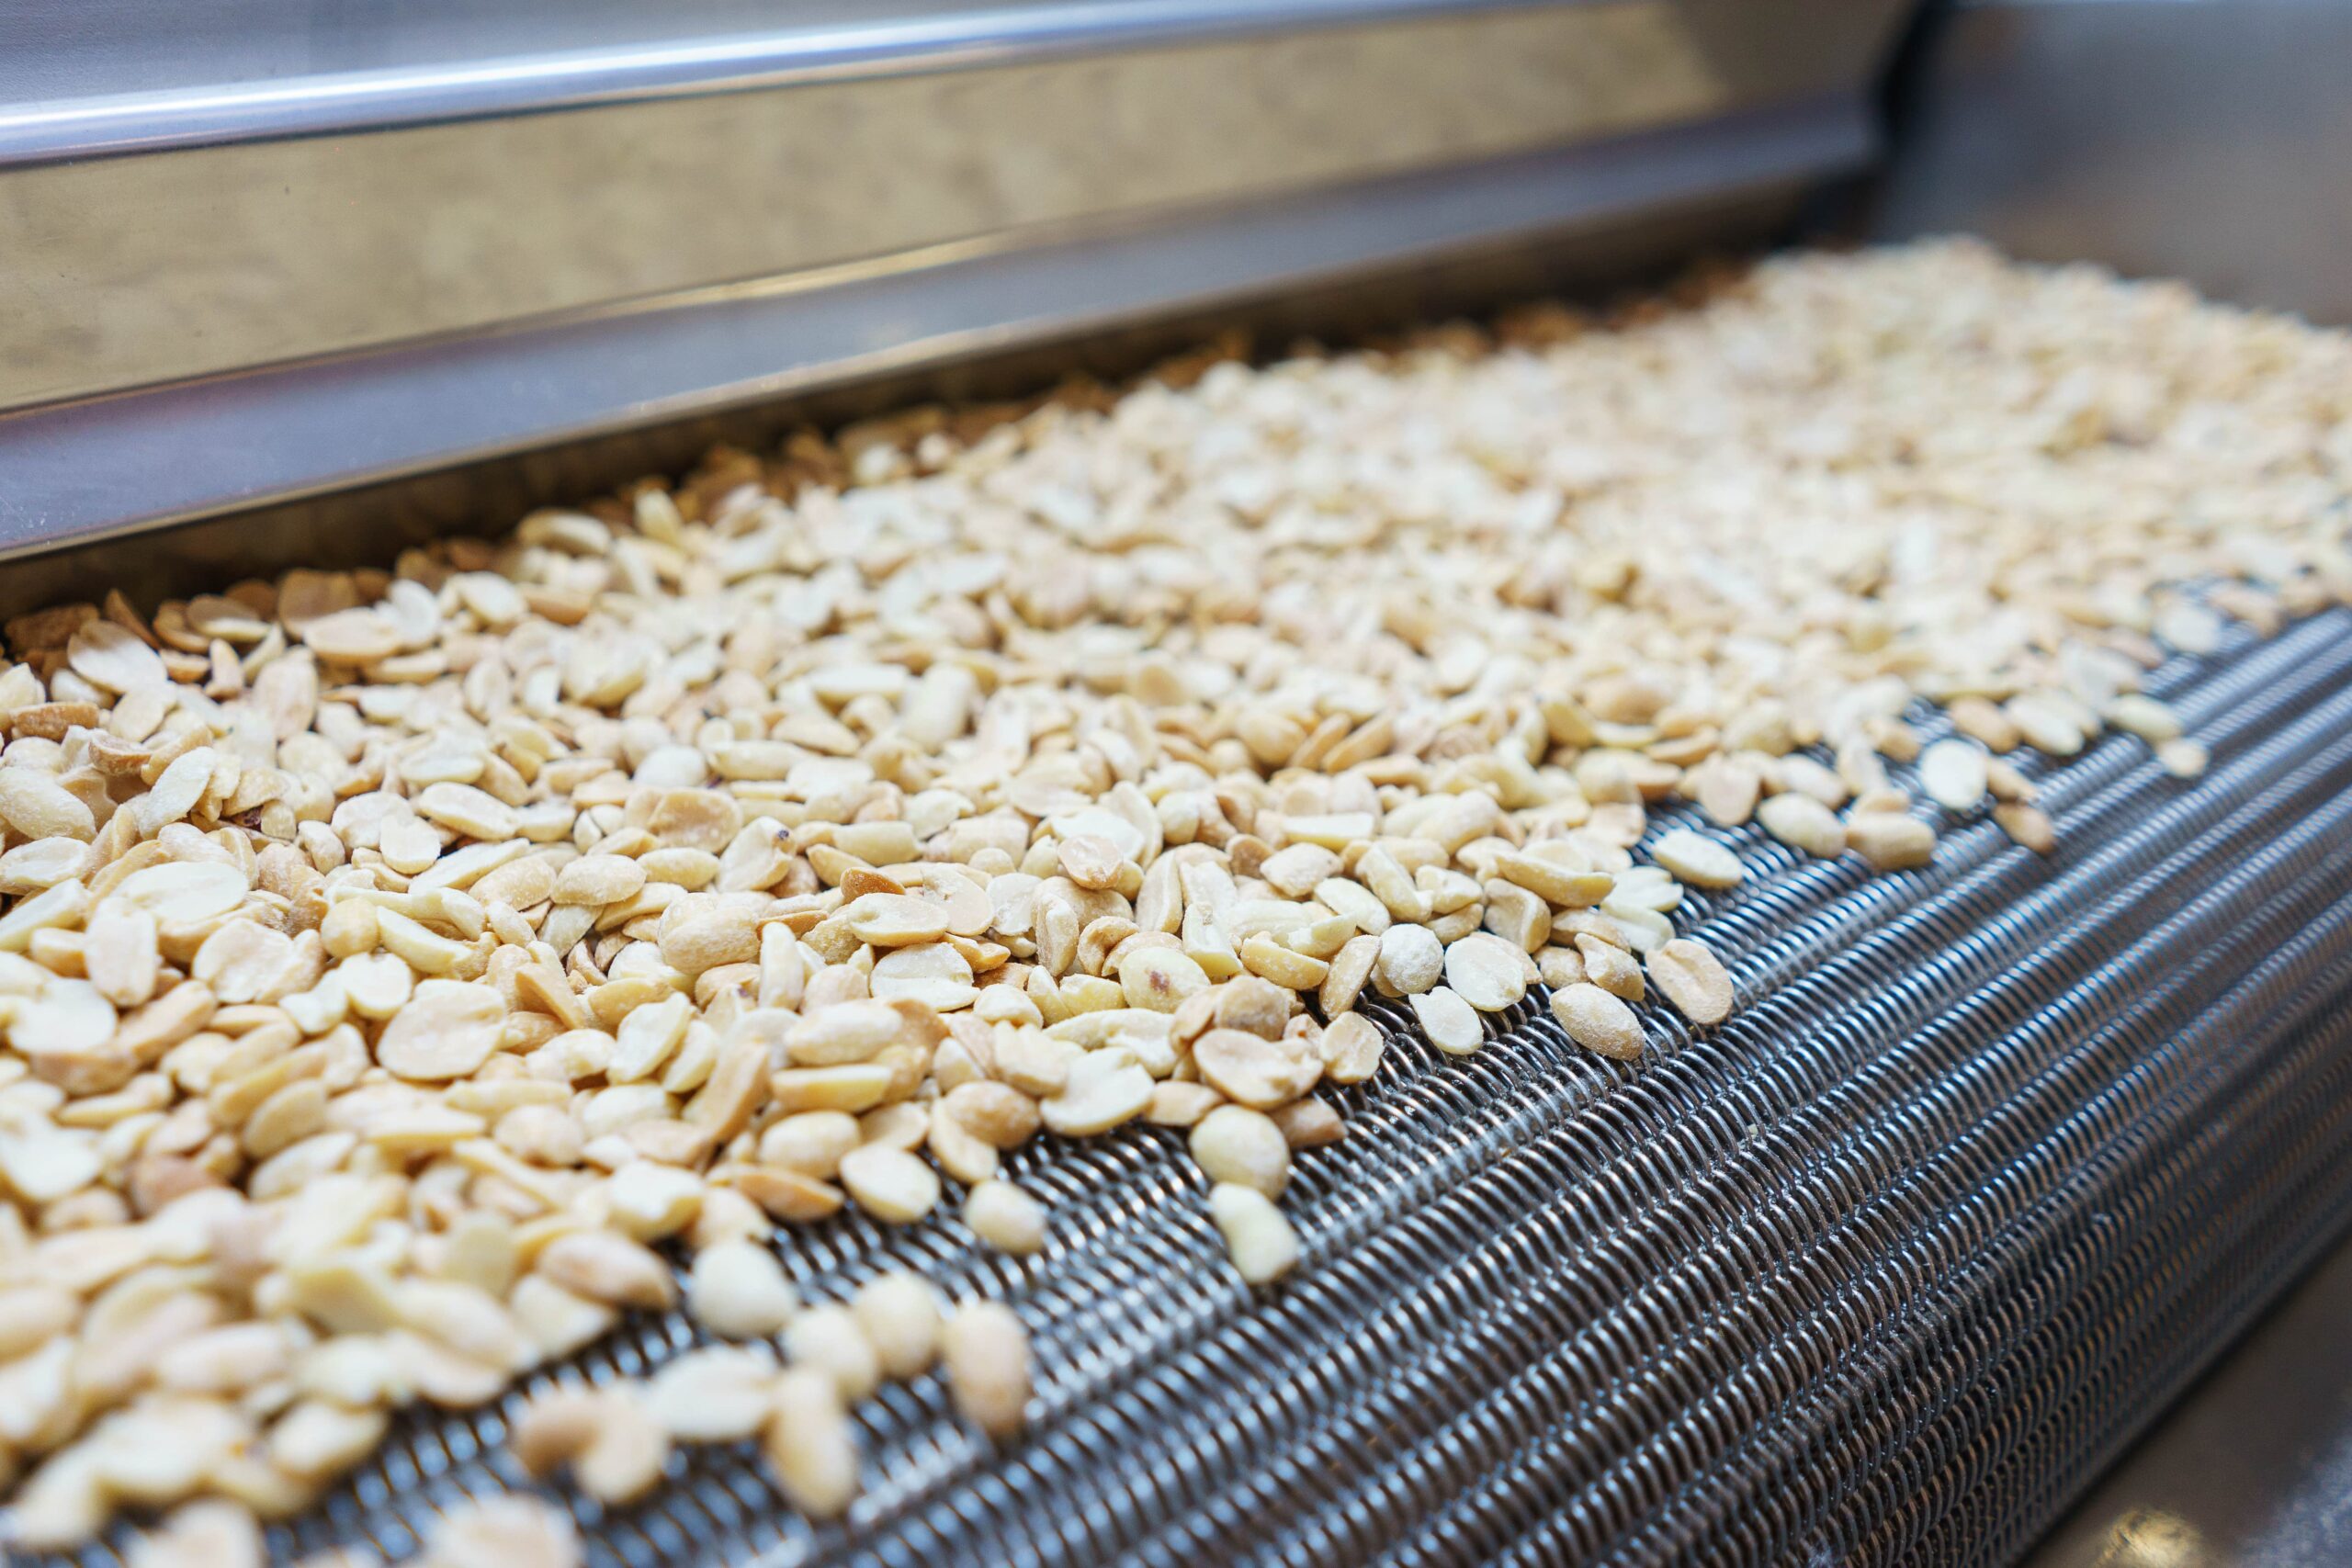 Peanuts being processed on a wire-mesh conveyor belt used for food handling and processing.